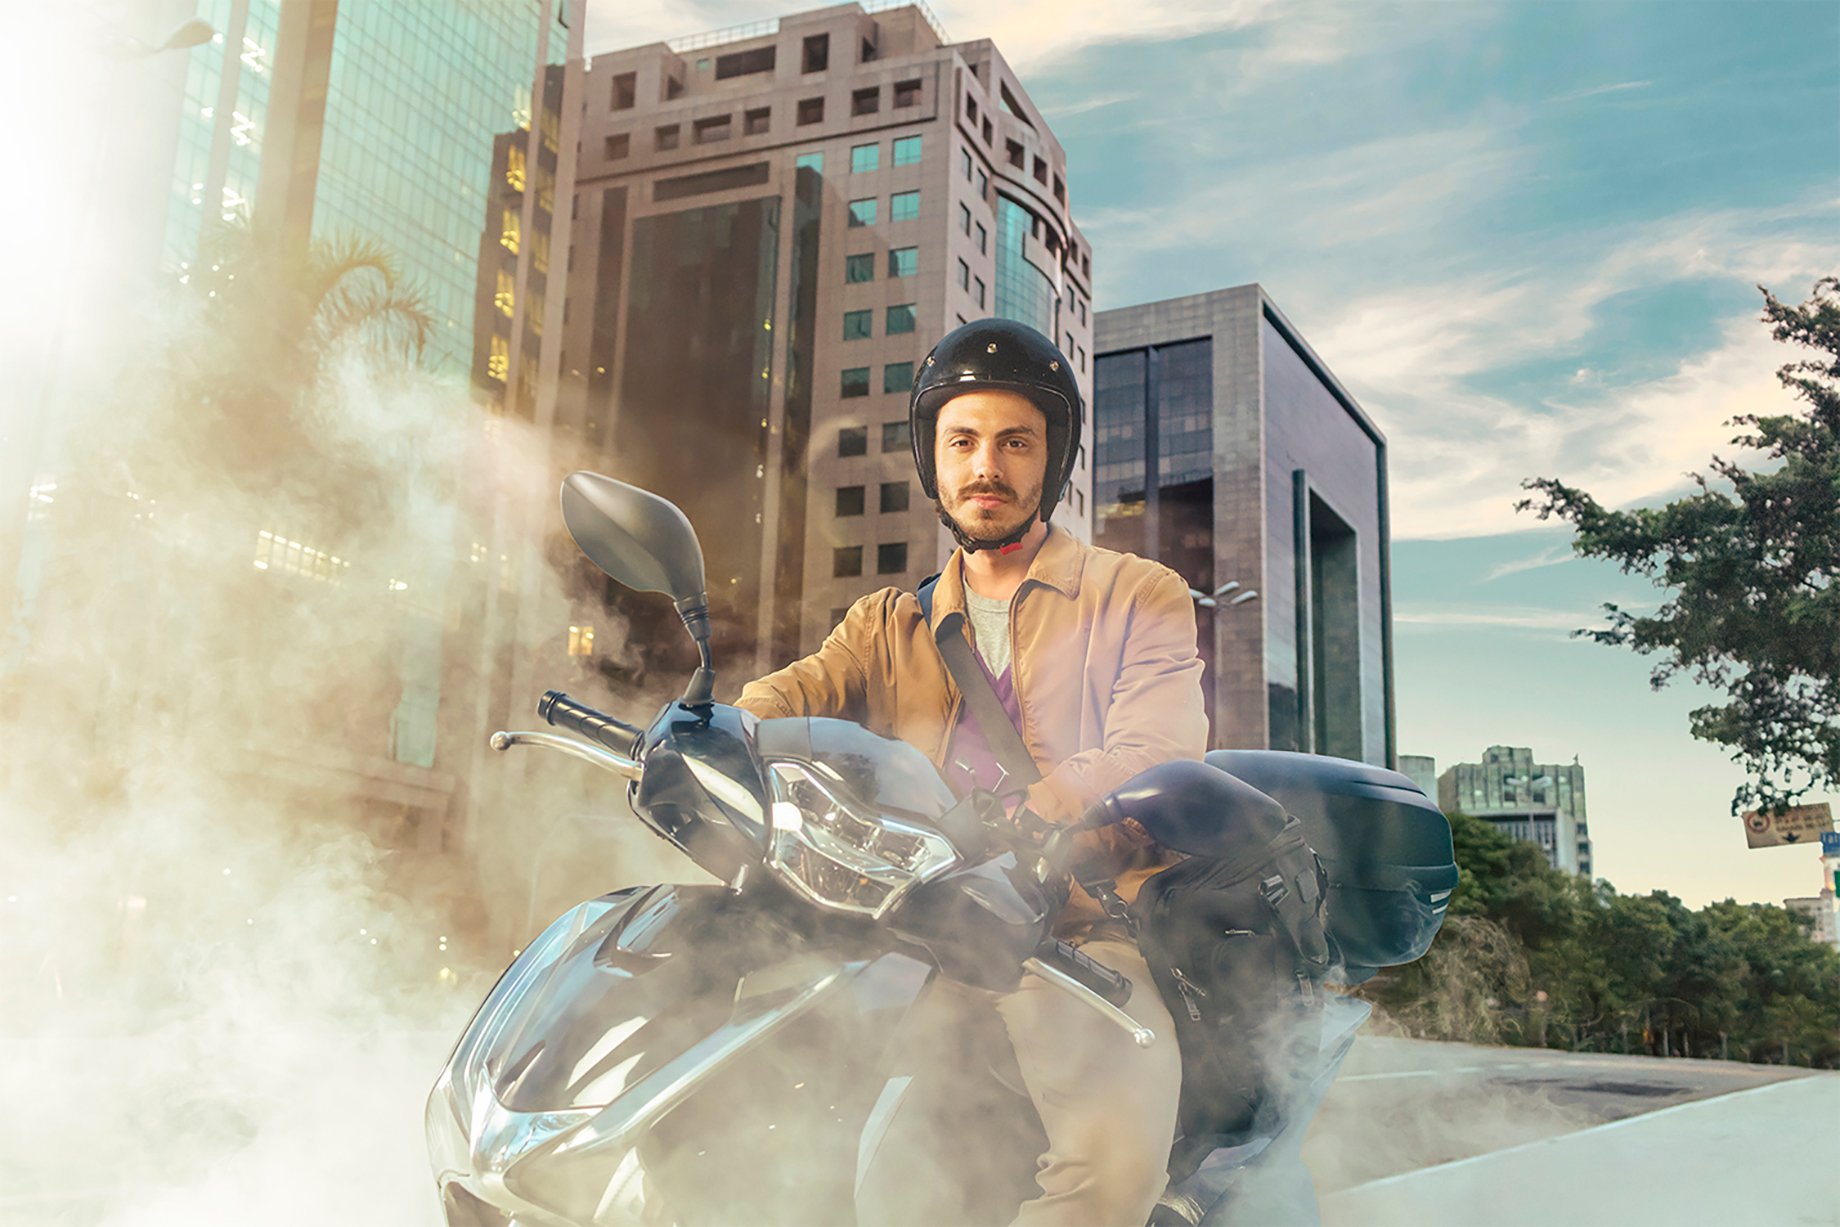 Portrait of a man riding motorcycle with dust around him shot by Claus Lehmann for Allegra campaign